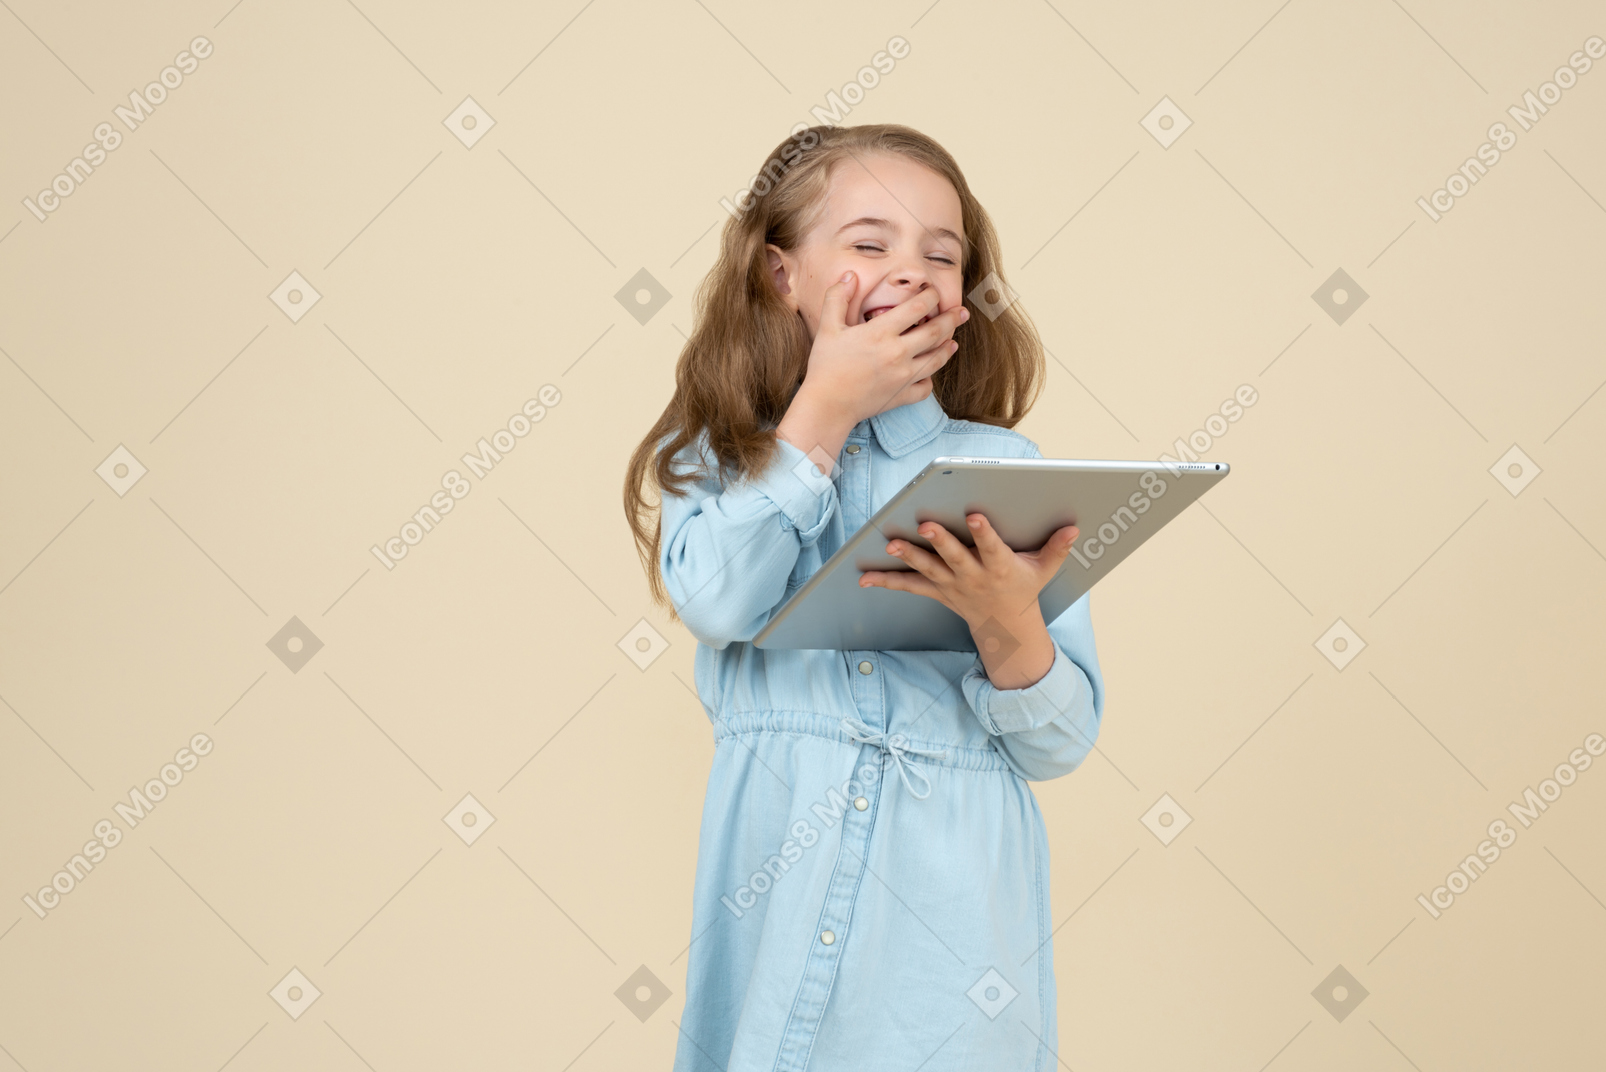 Cute little girl holding a tablet and laughing